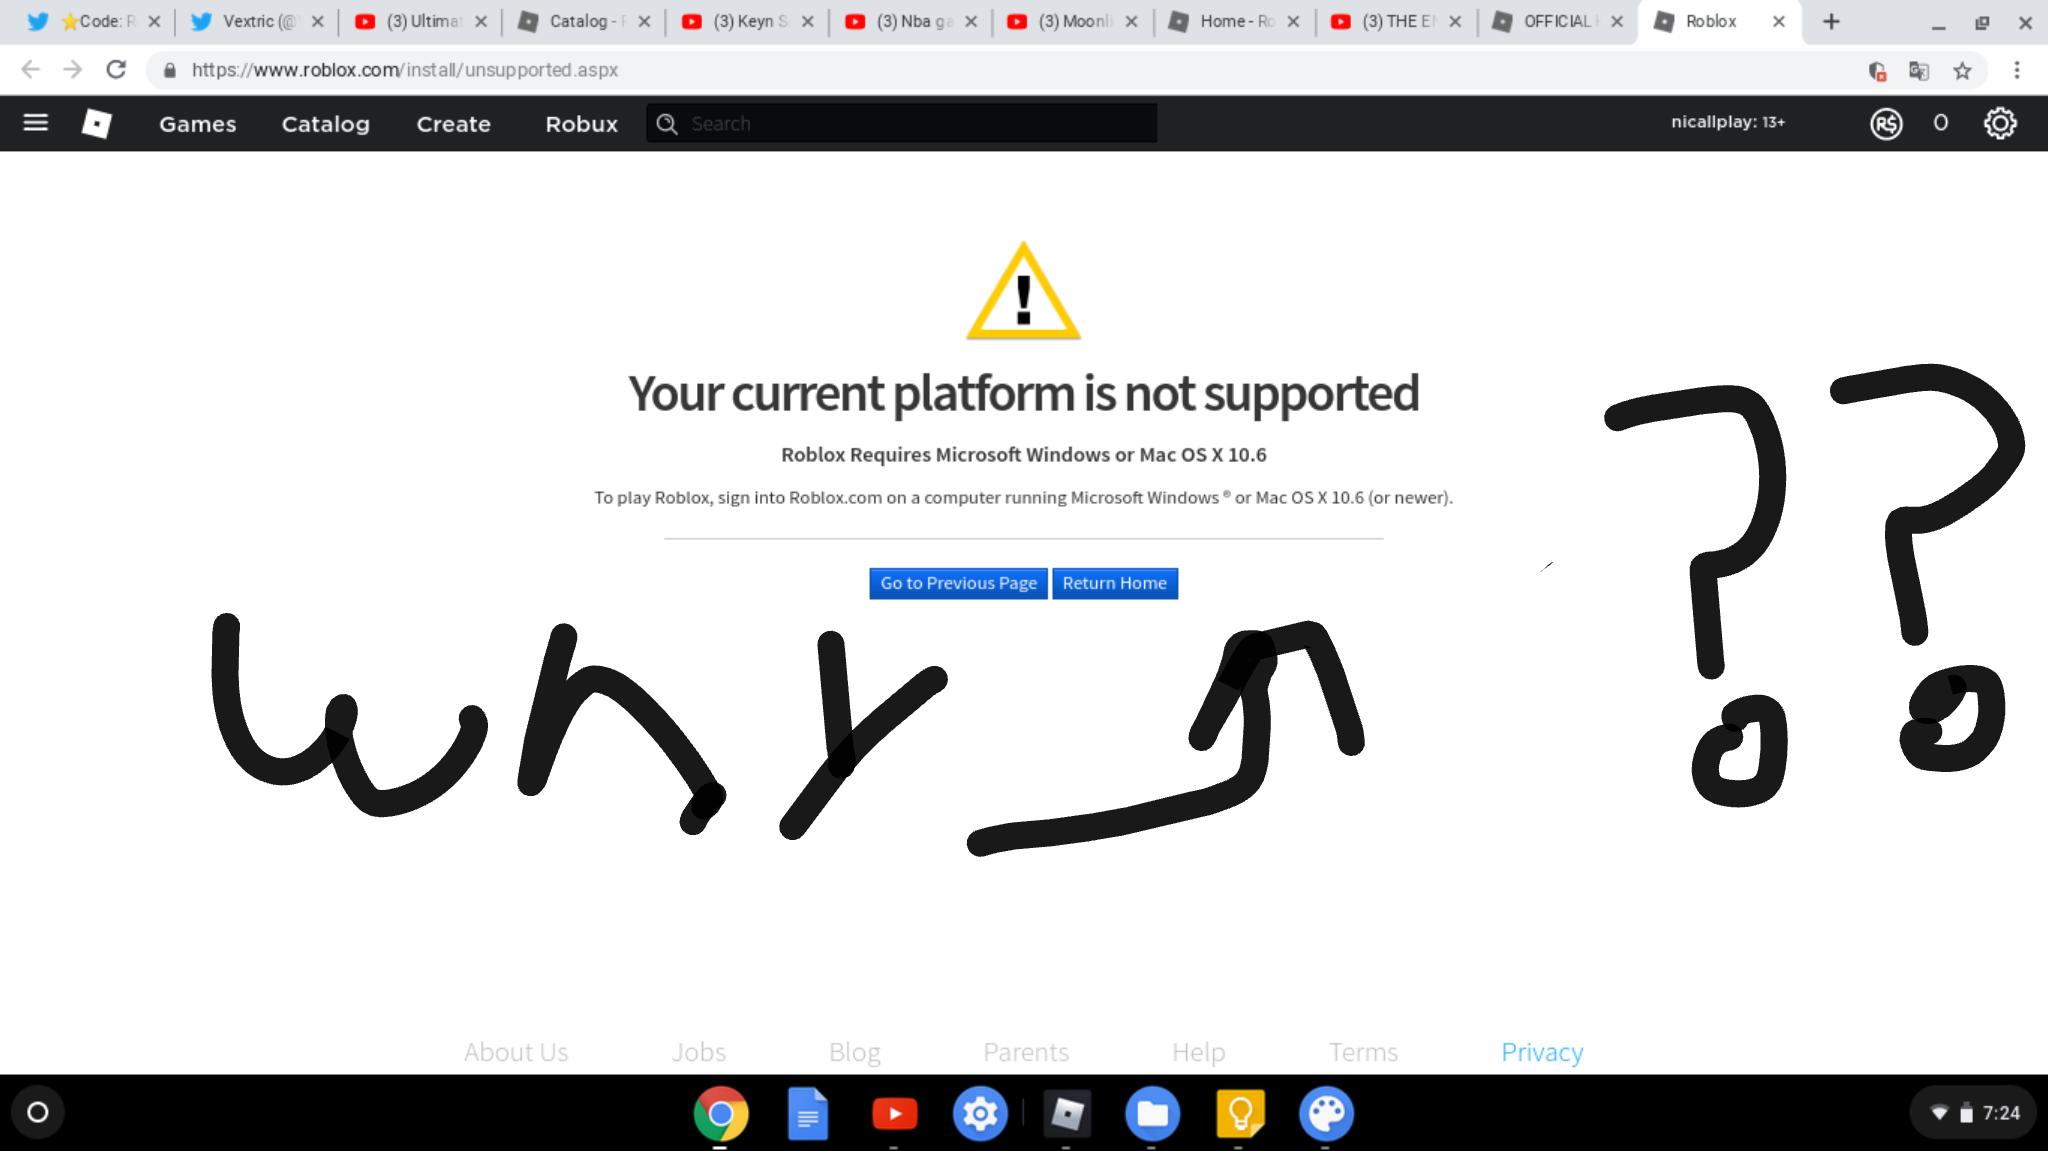 Keynsalazar93 On Twitter Myusernamesthis This Happens When I Try Joining Your Server - www.roblox.com/install